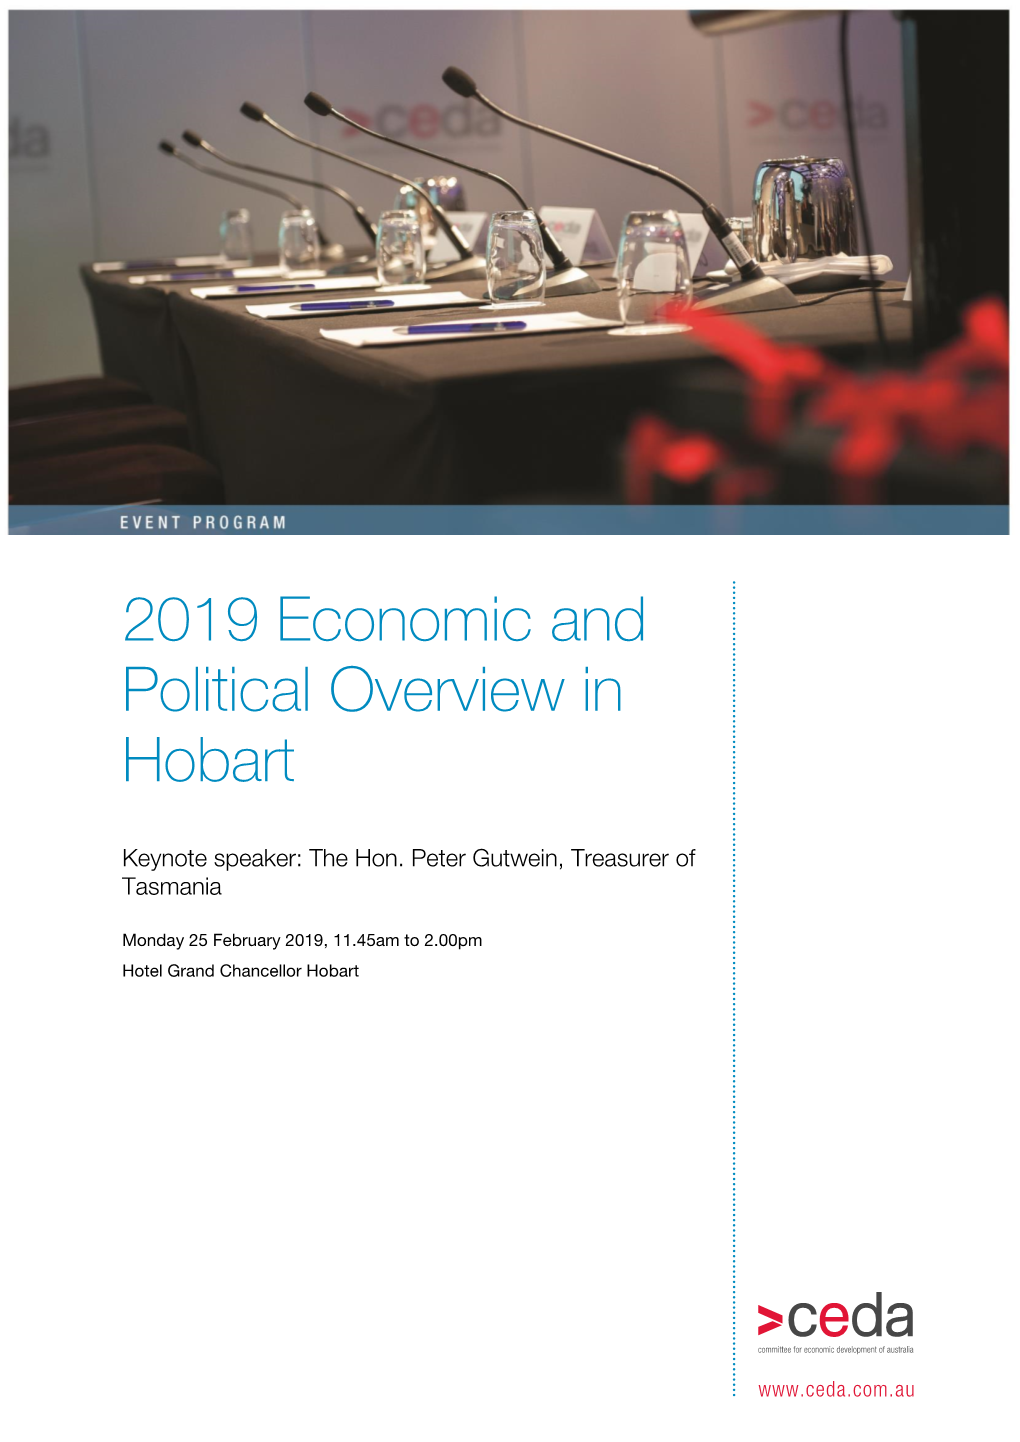 2019 Economic and Political Overview in Hobart